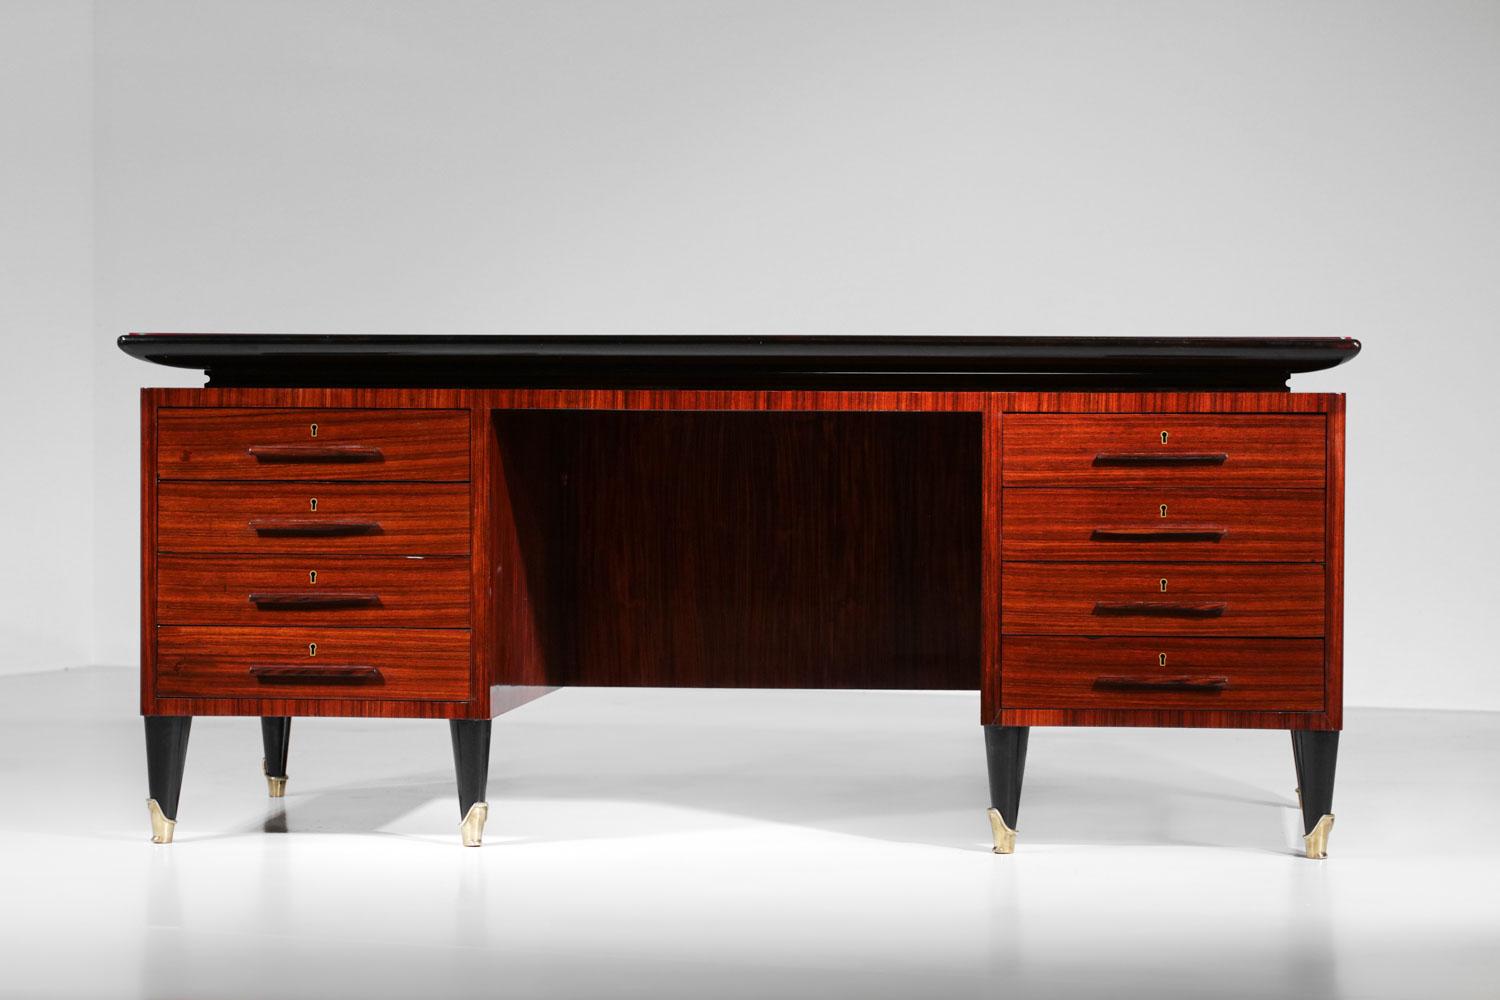 Italian large Desk by Vittorio Dassi solid wood and glass 60s - G725 For Sale 4